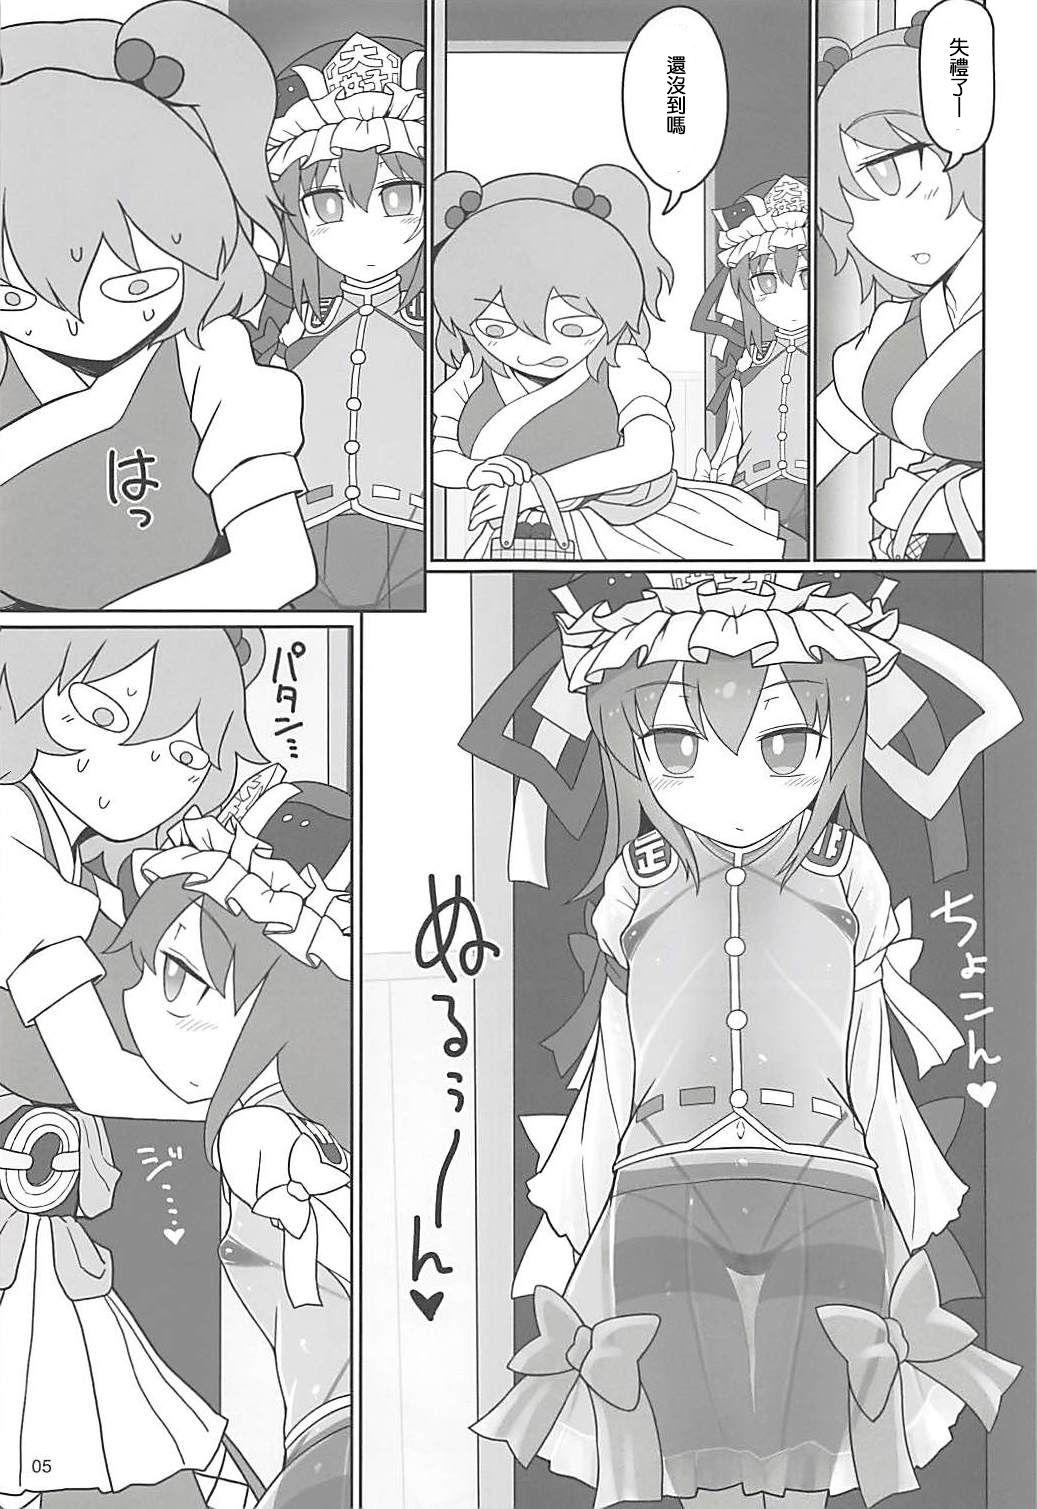 Sesso Enma Lover | 阎魔Lover - Touhou project Lesbian Porn - Page 4